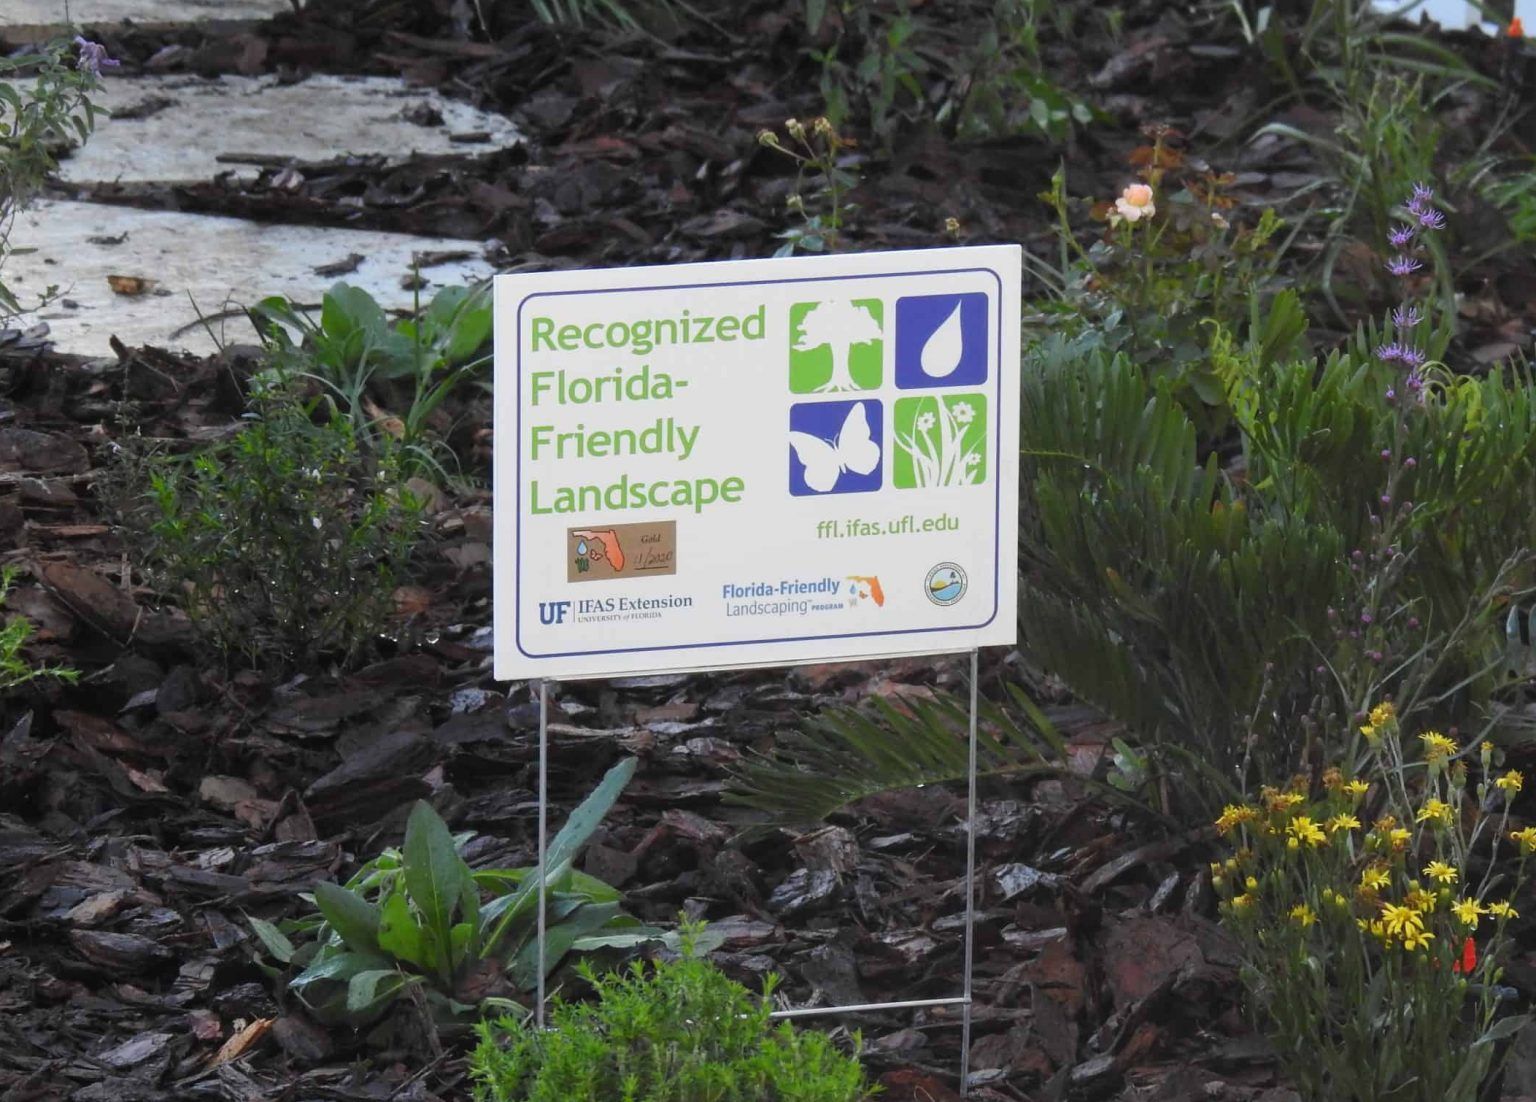 In a garden, a sign reads "Recognized Florida-Friendly Landscape"